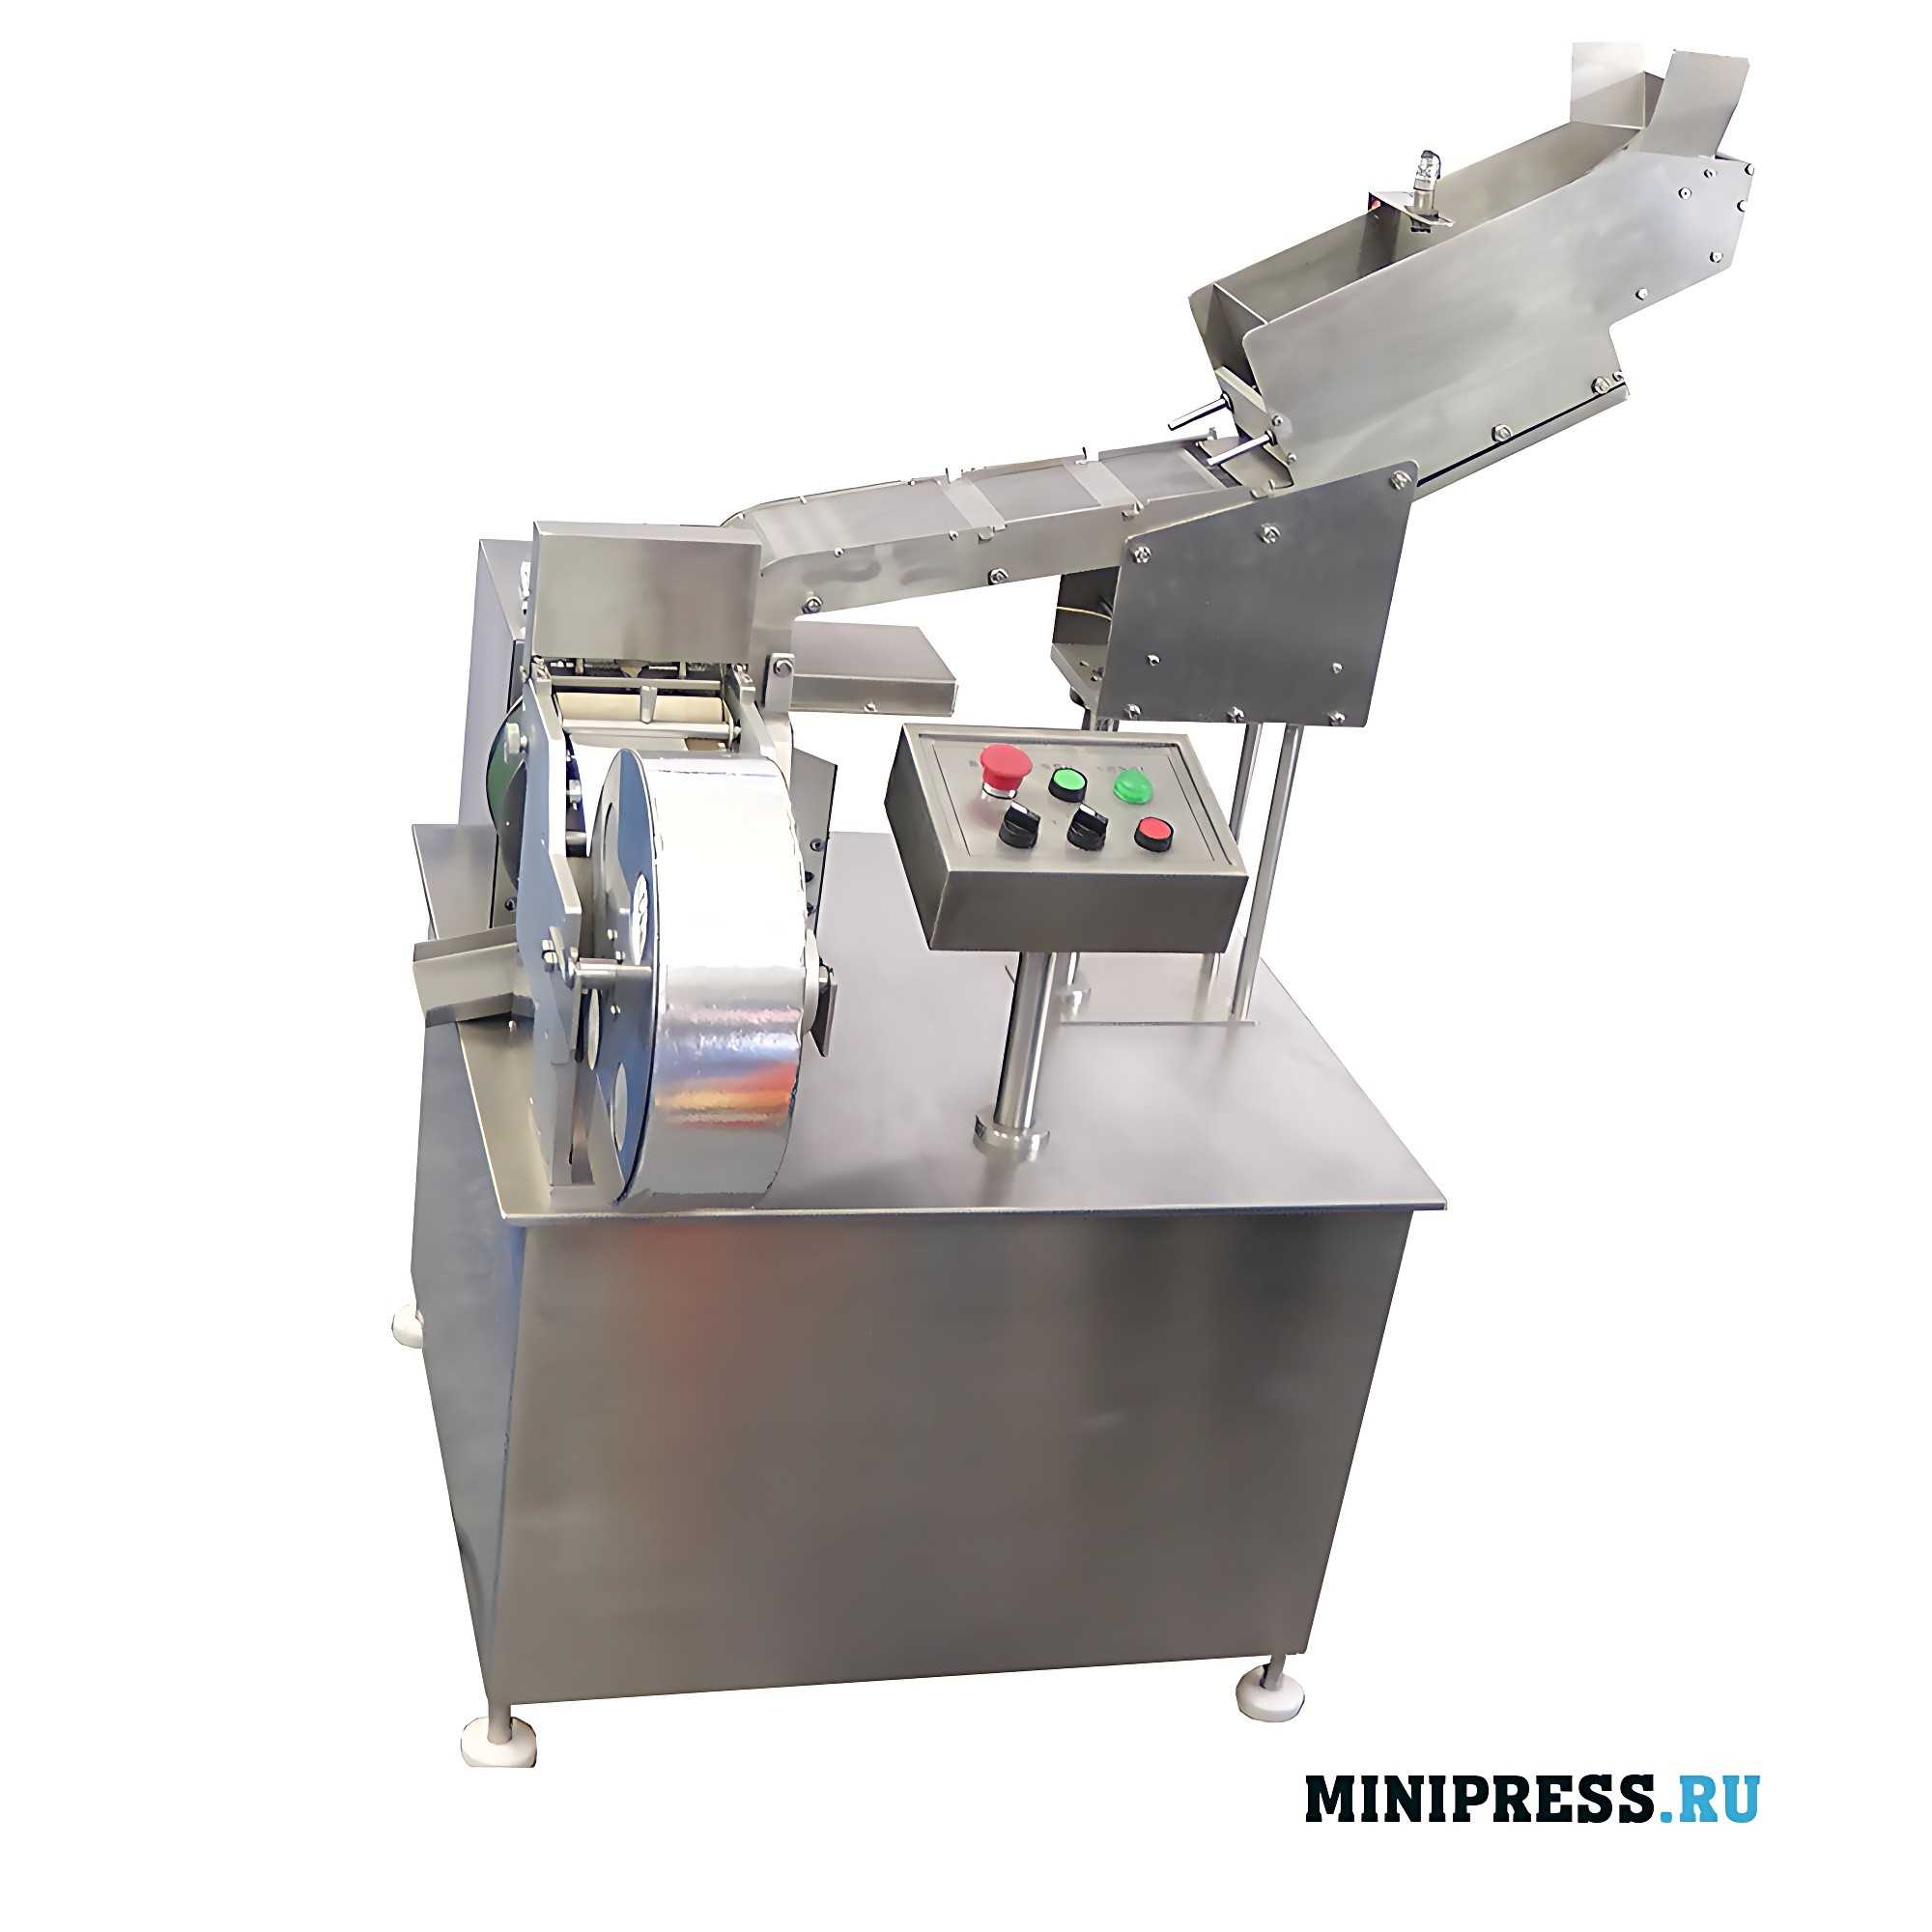 Tablets group foil wrapping machine GR-10